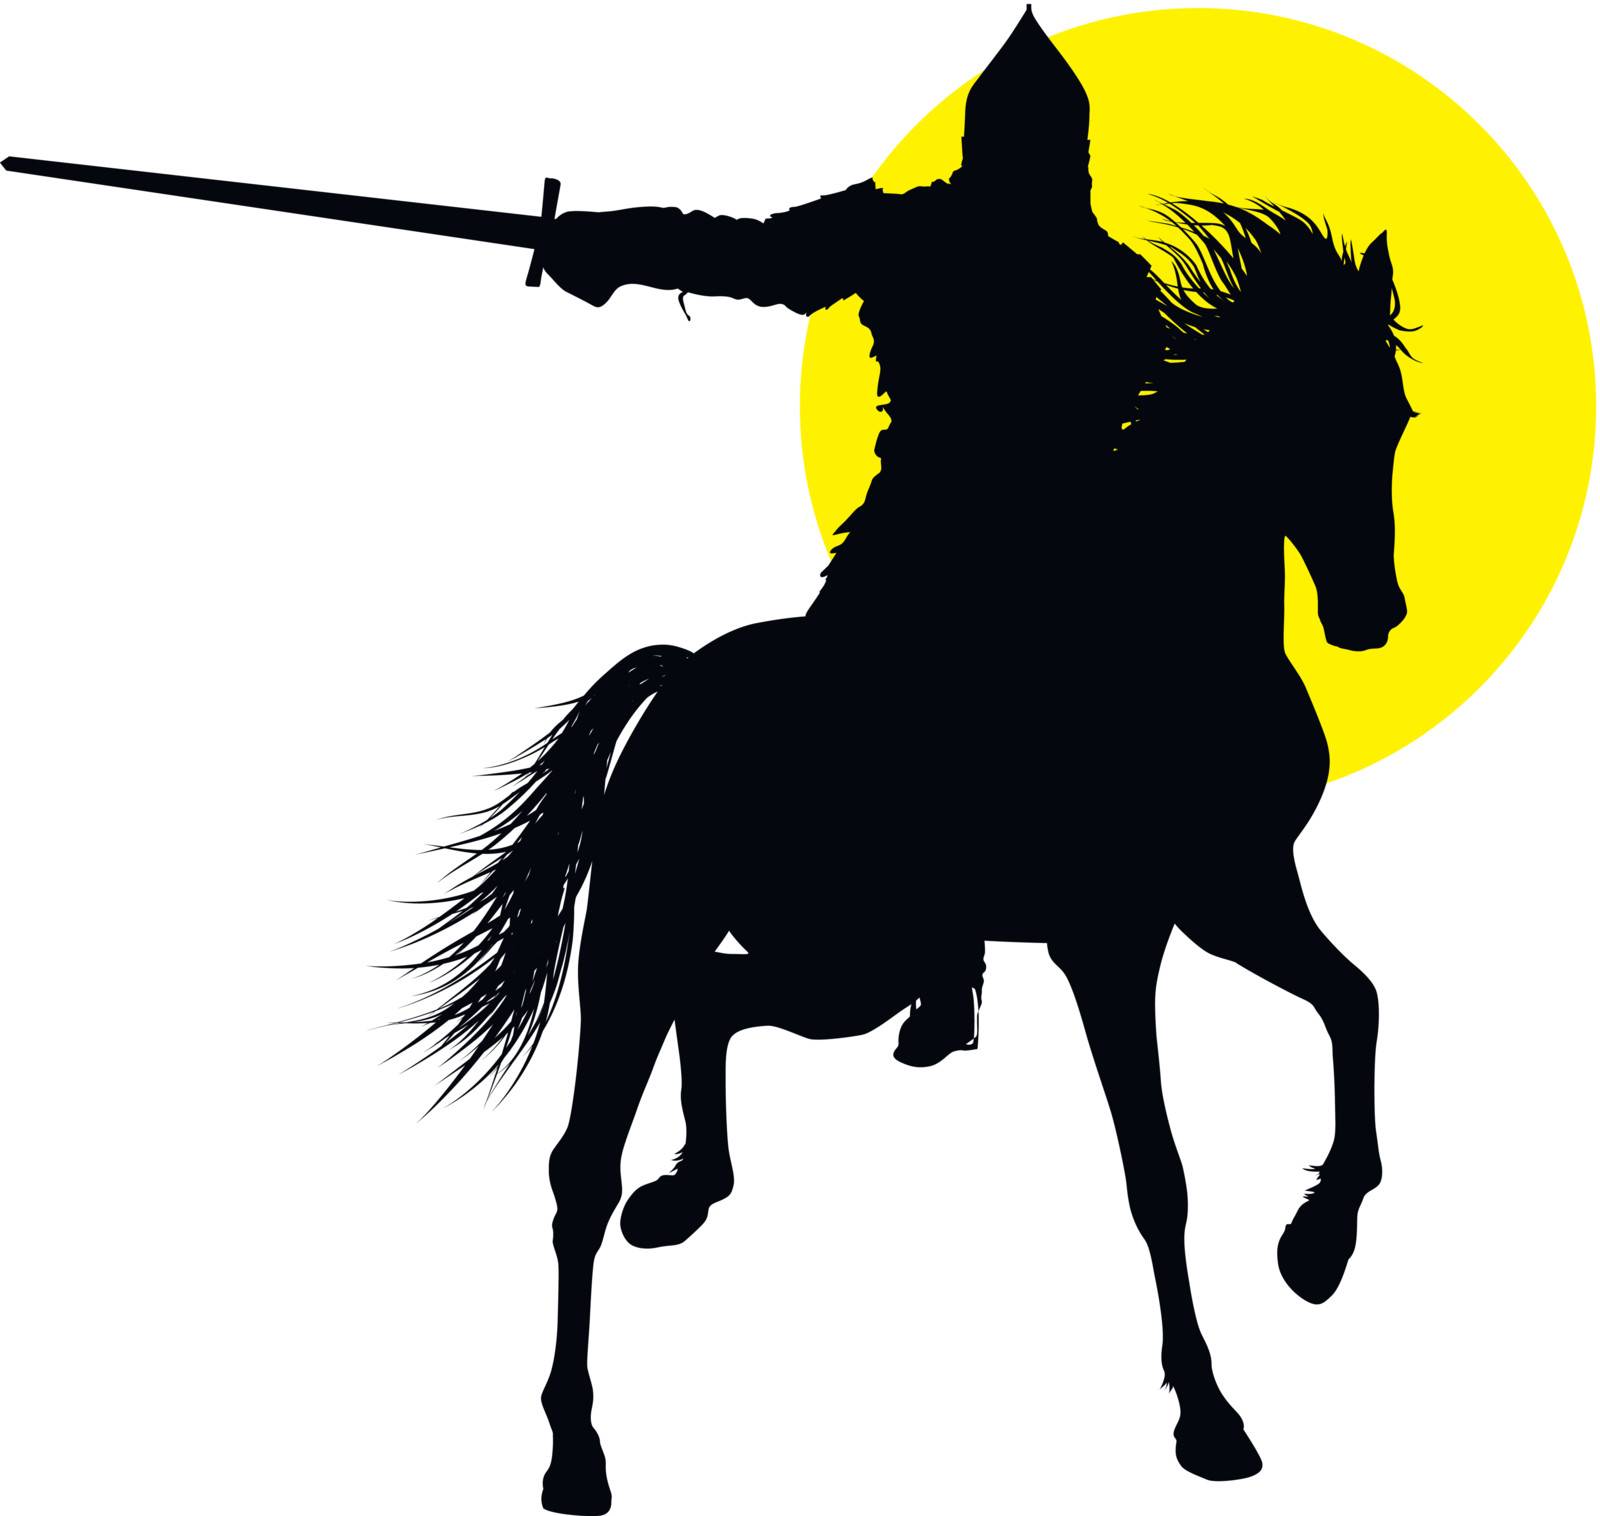 Knight with sword riding on horseback detailed vector silhouette